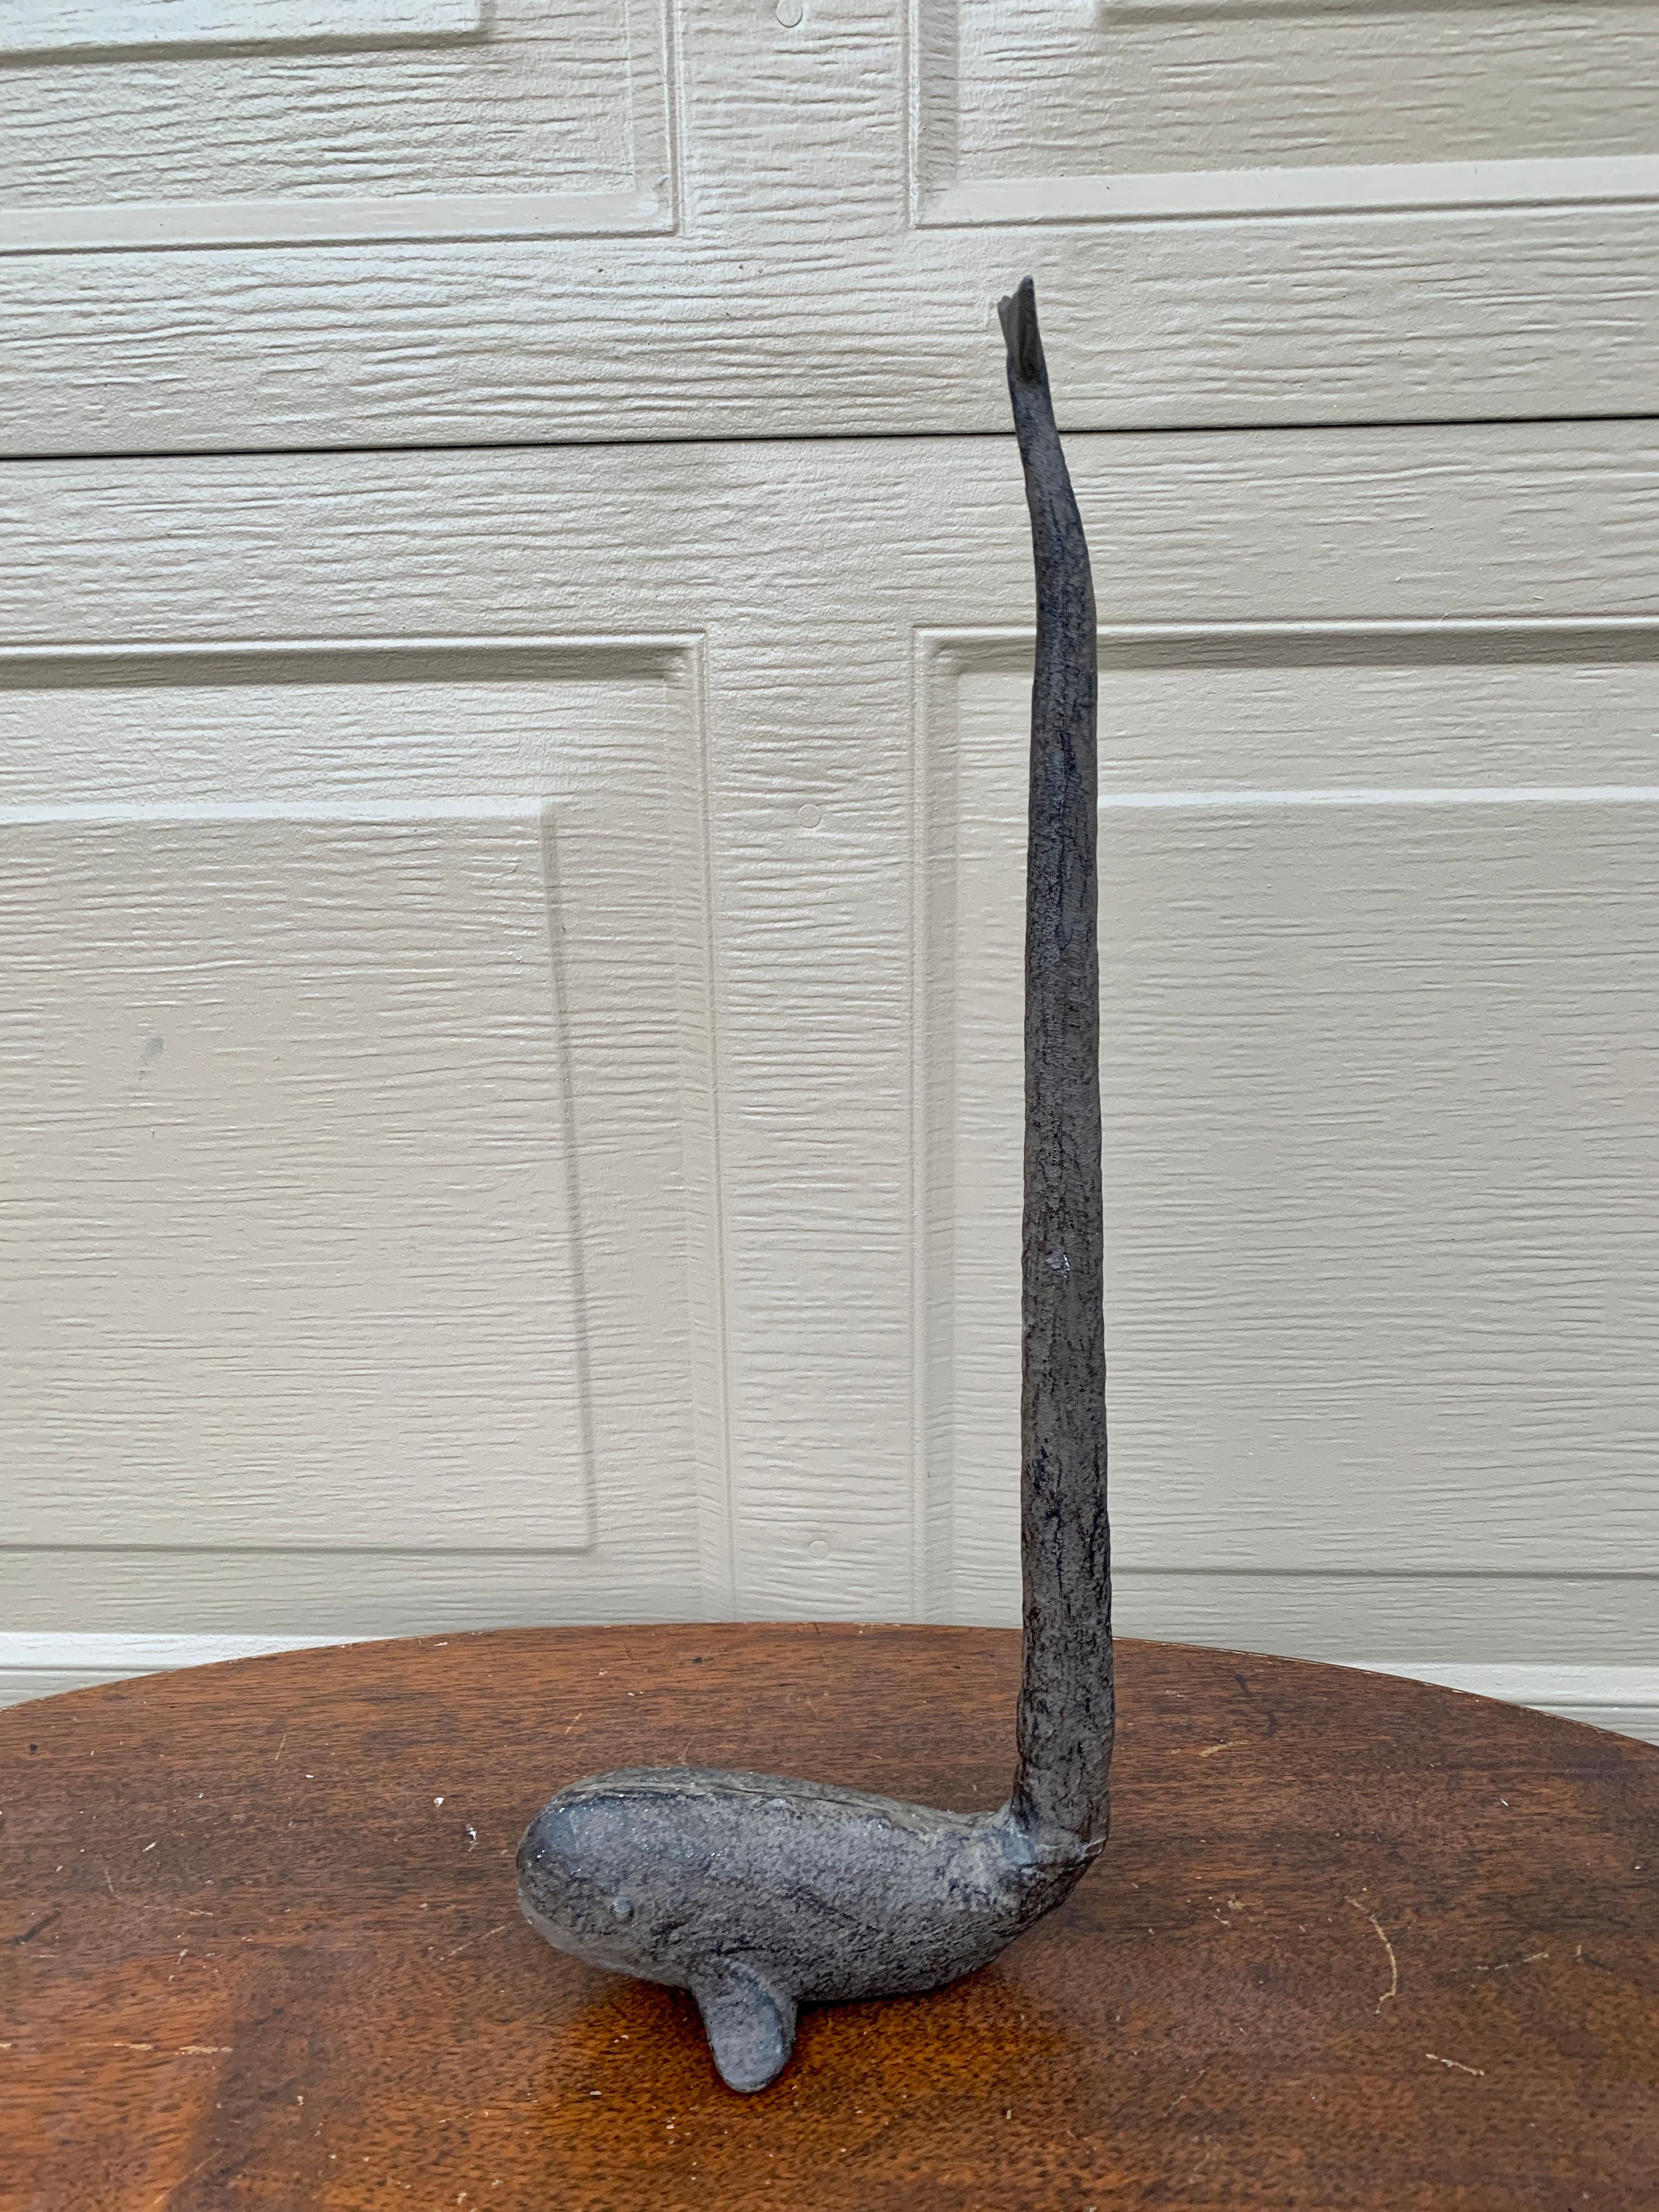 Country Folk Art Cast Iron Whale Sculpture or Door Stop For Sale